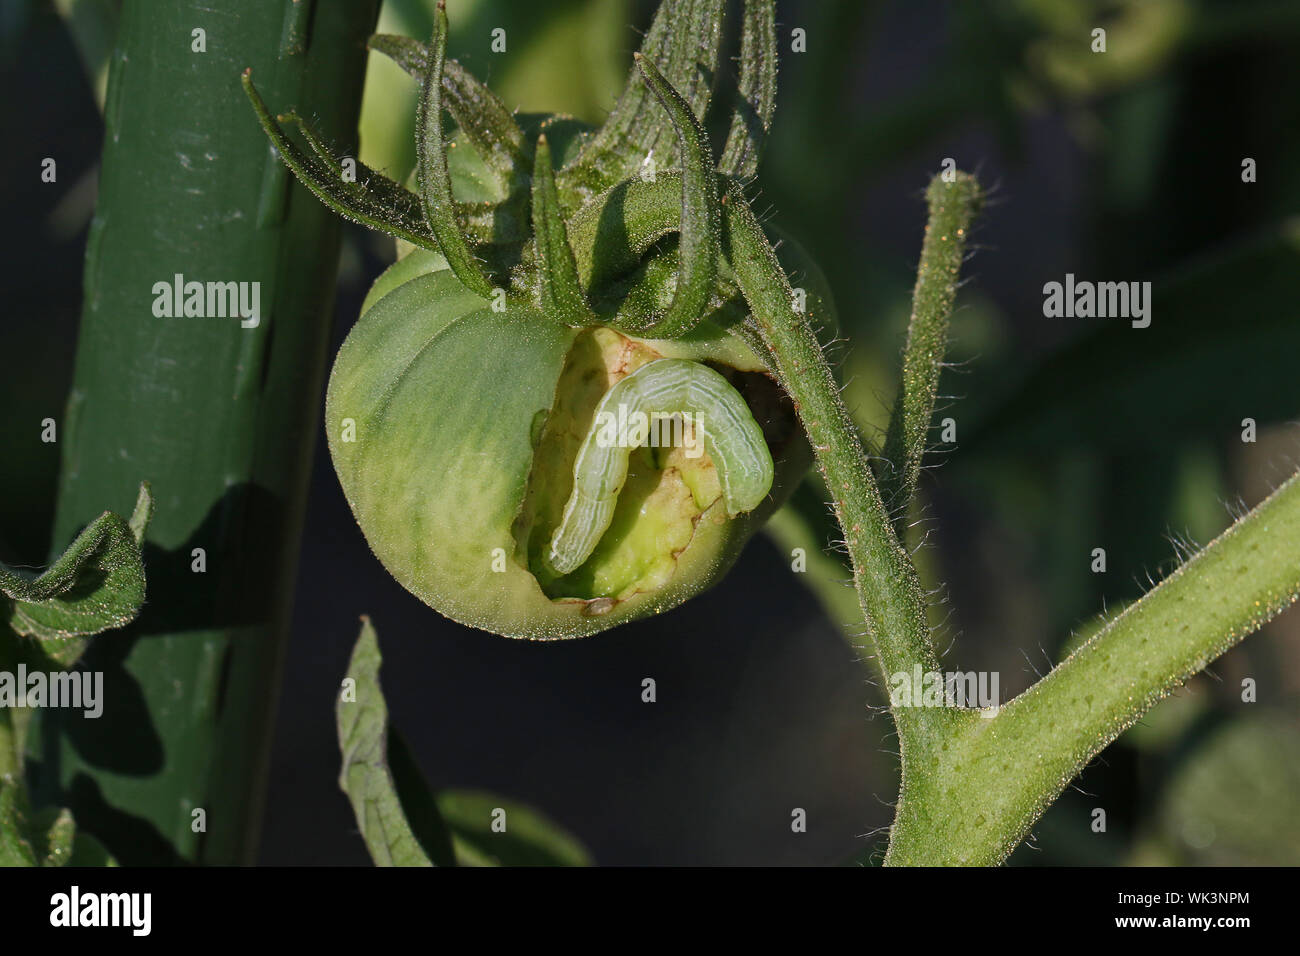 tomato horn worm larva of the five spotted hawk moth Latin Manduca quinquemaculata excavating a green tomato in summer in Italy Stock Photo